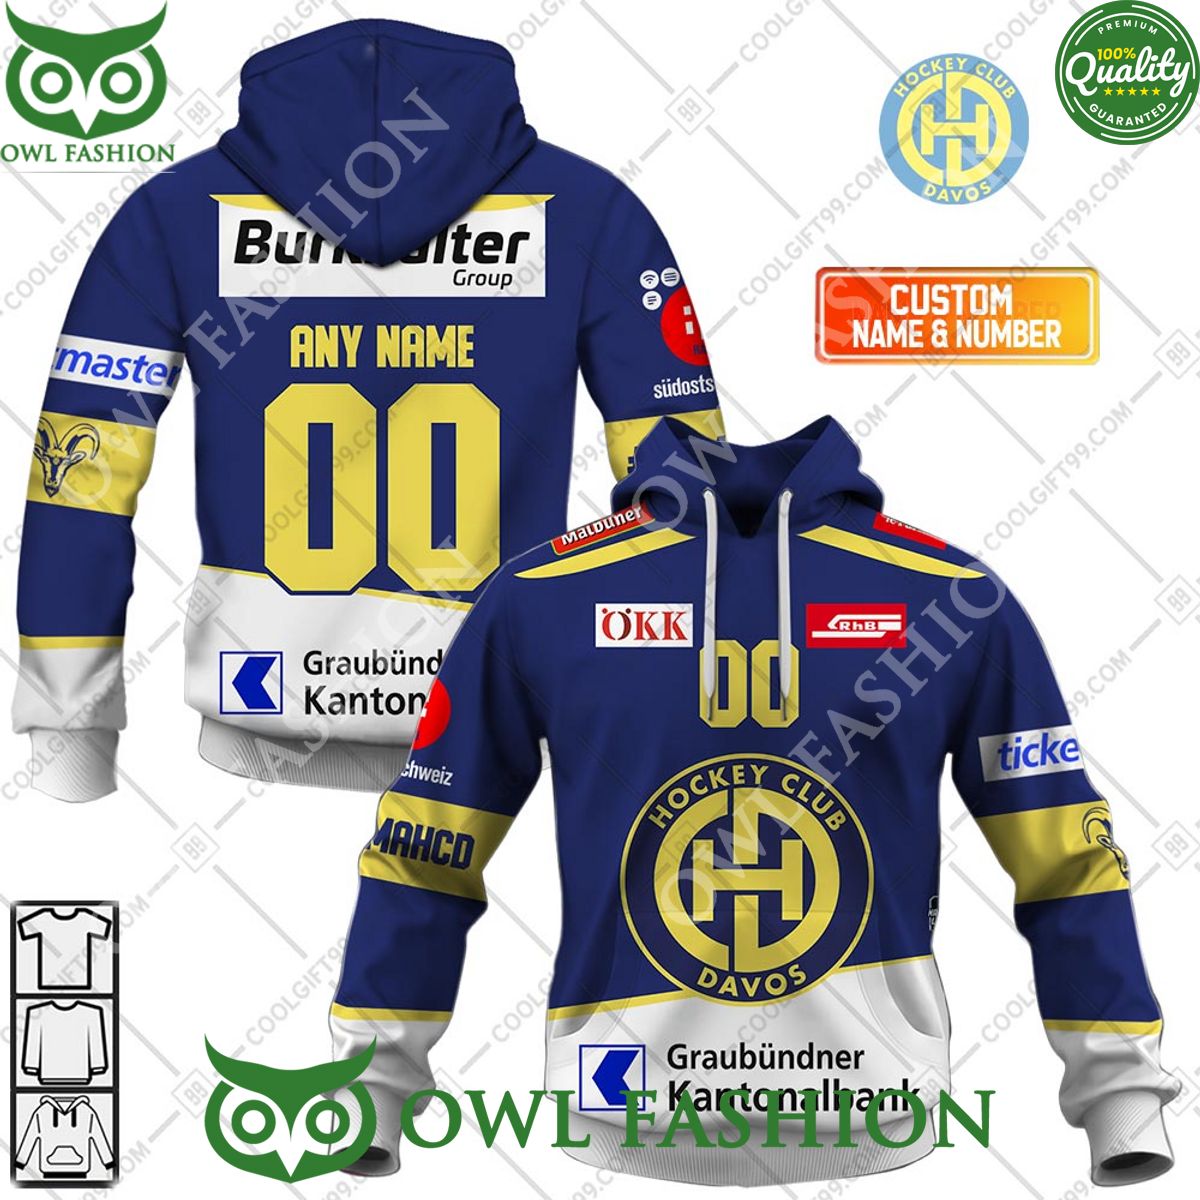 personalized name and number nl hockey hc davos home jersey style printed hoodie shirt 1 cyhP9.jpg